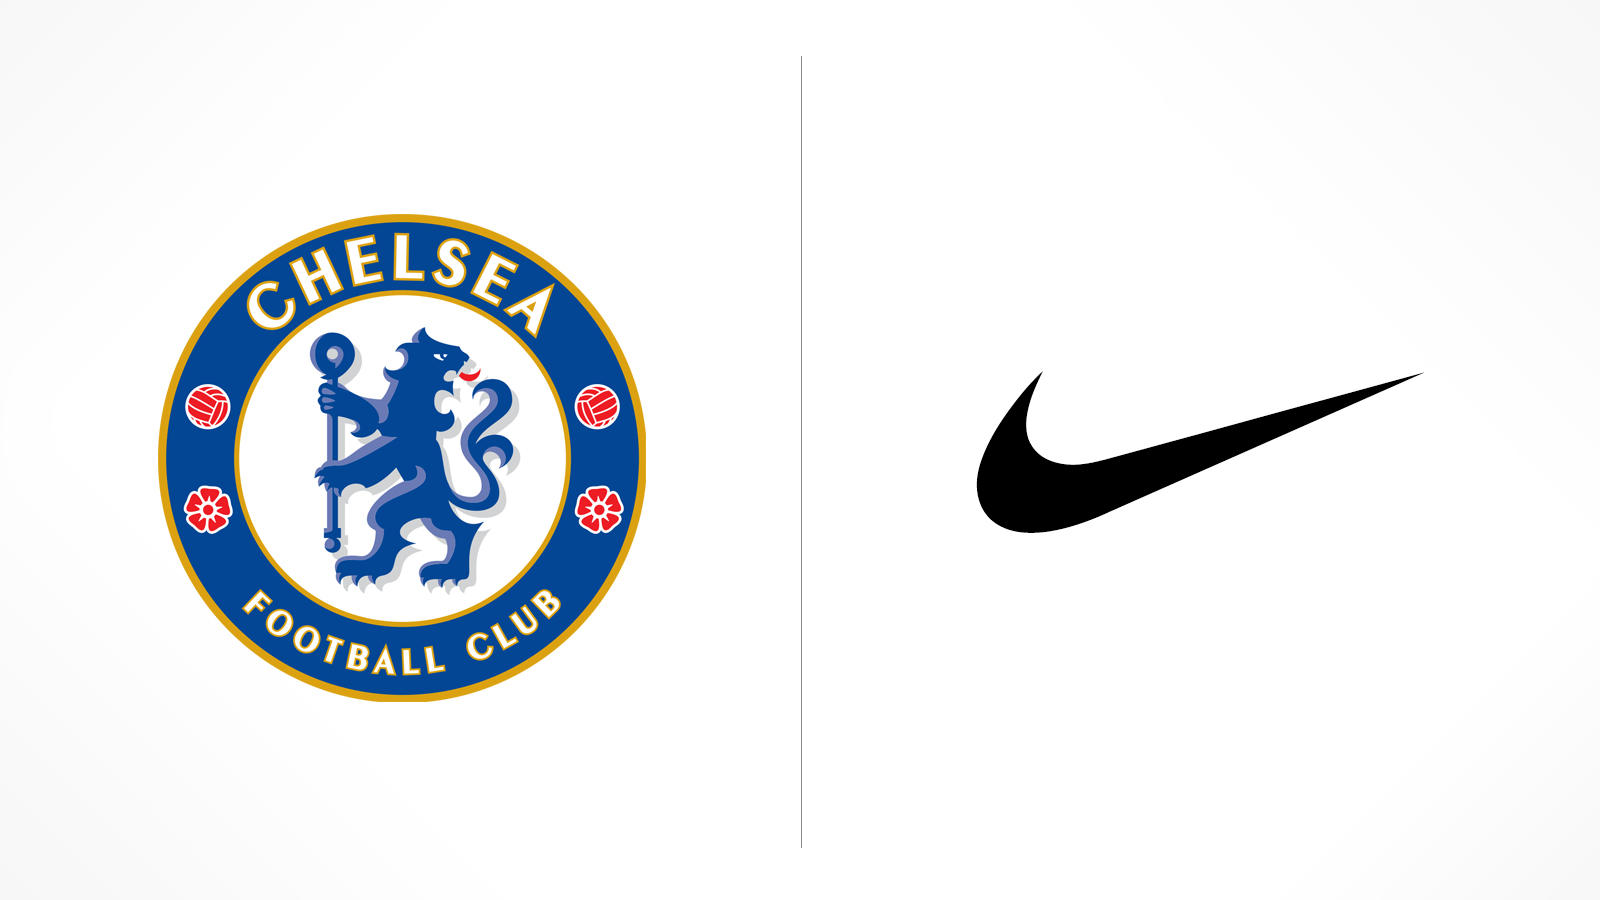 Nike are the current sponsors of Chelsea.